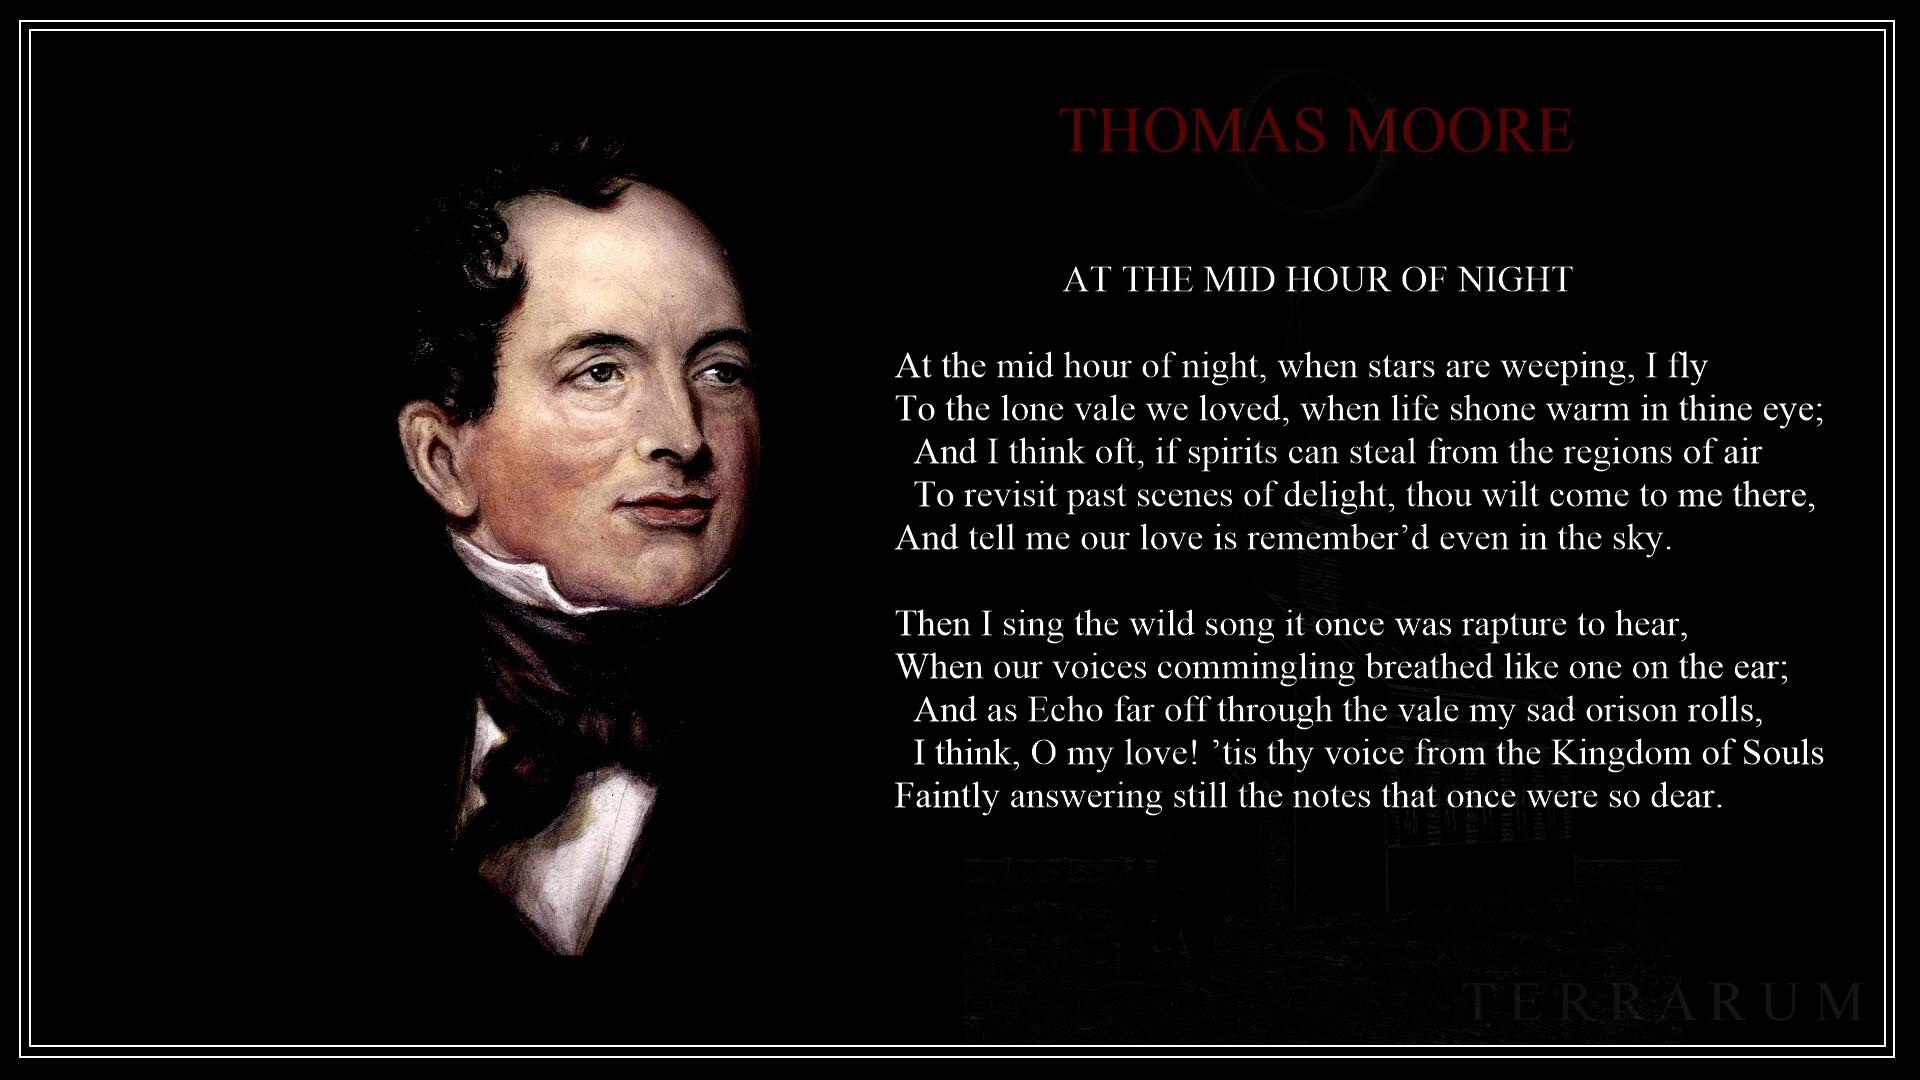 117. Thomas Moore. At the mid hour of night